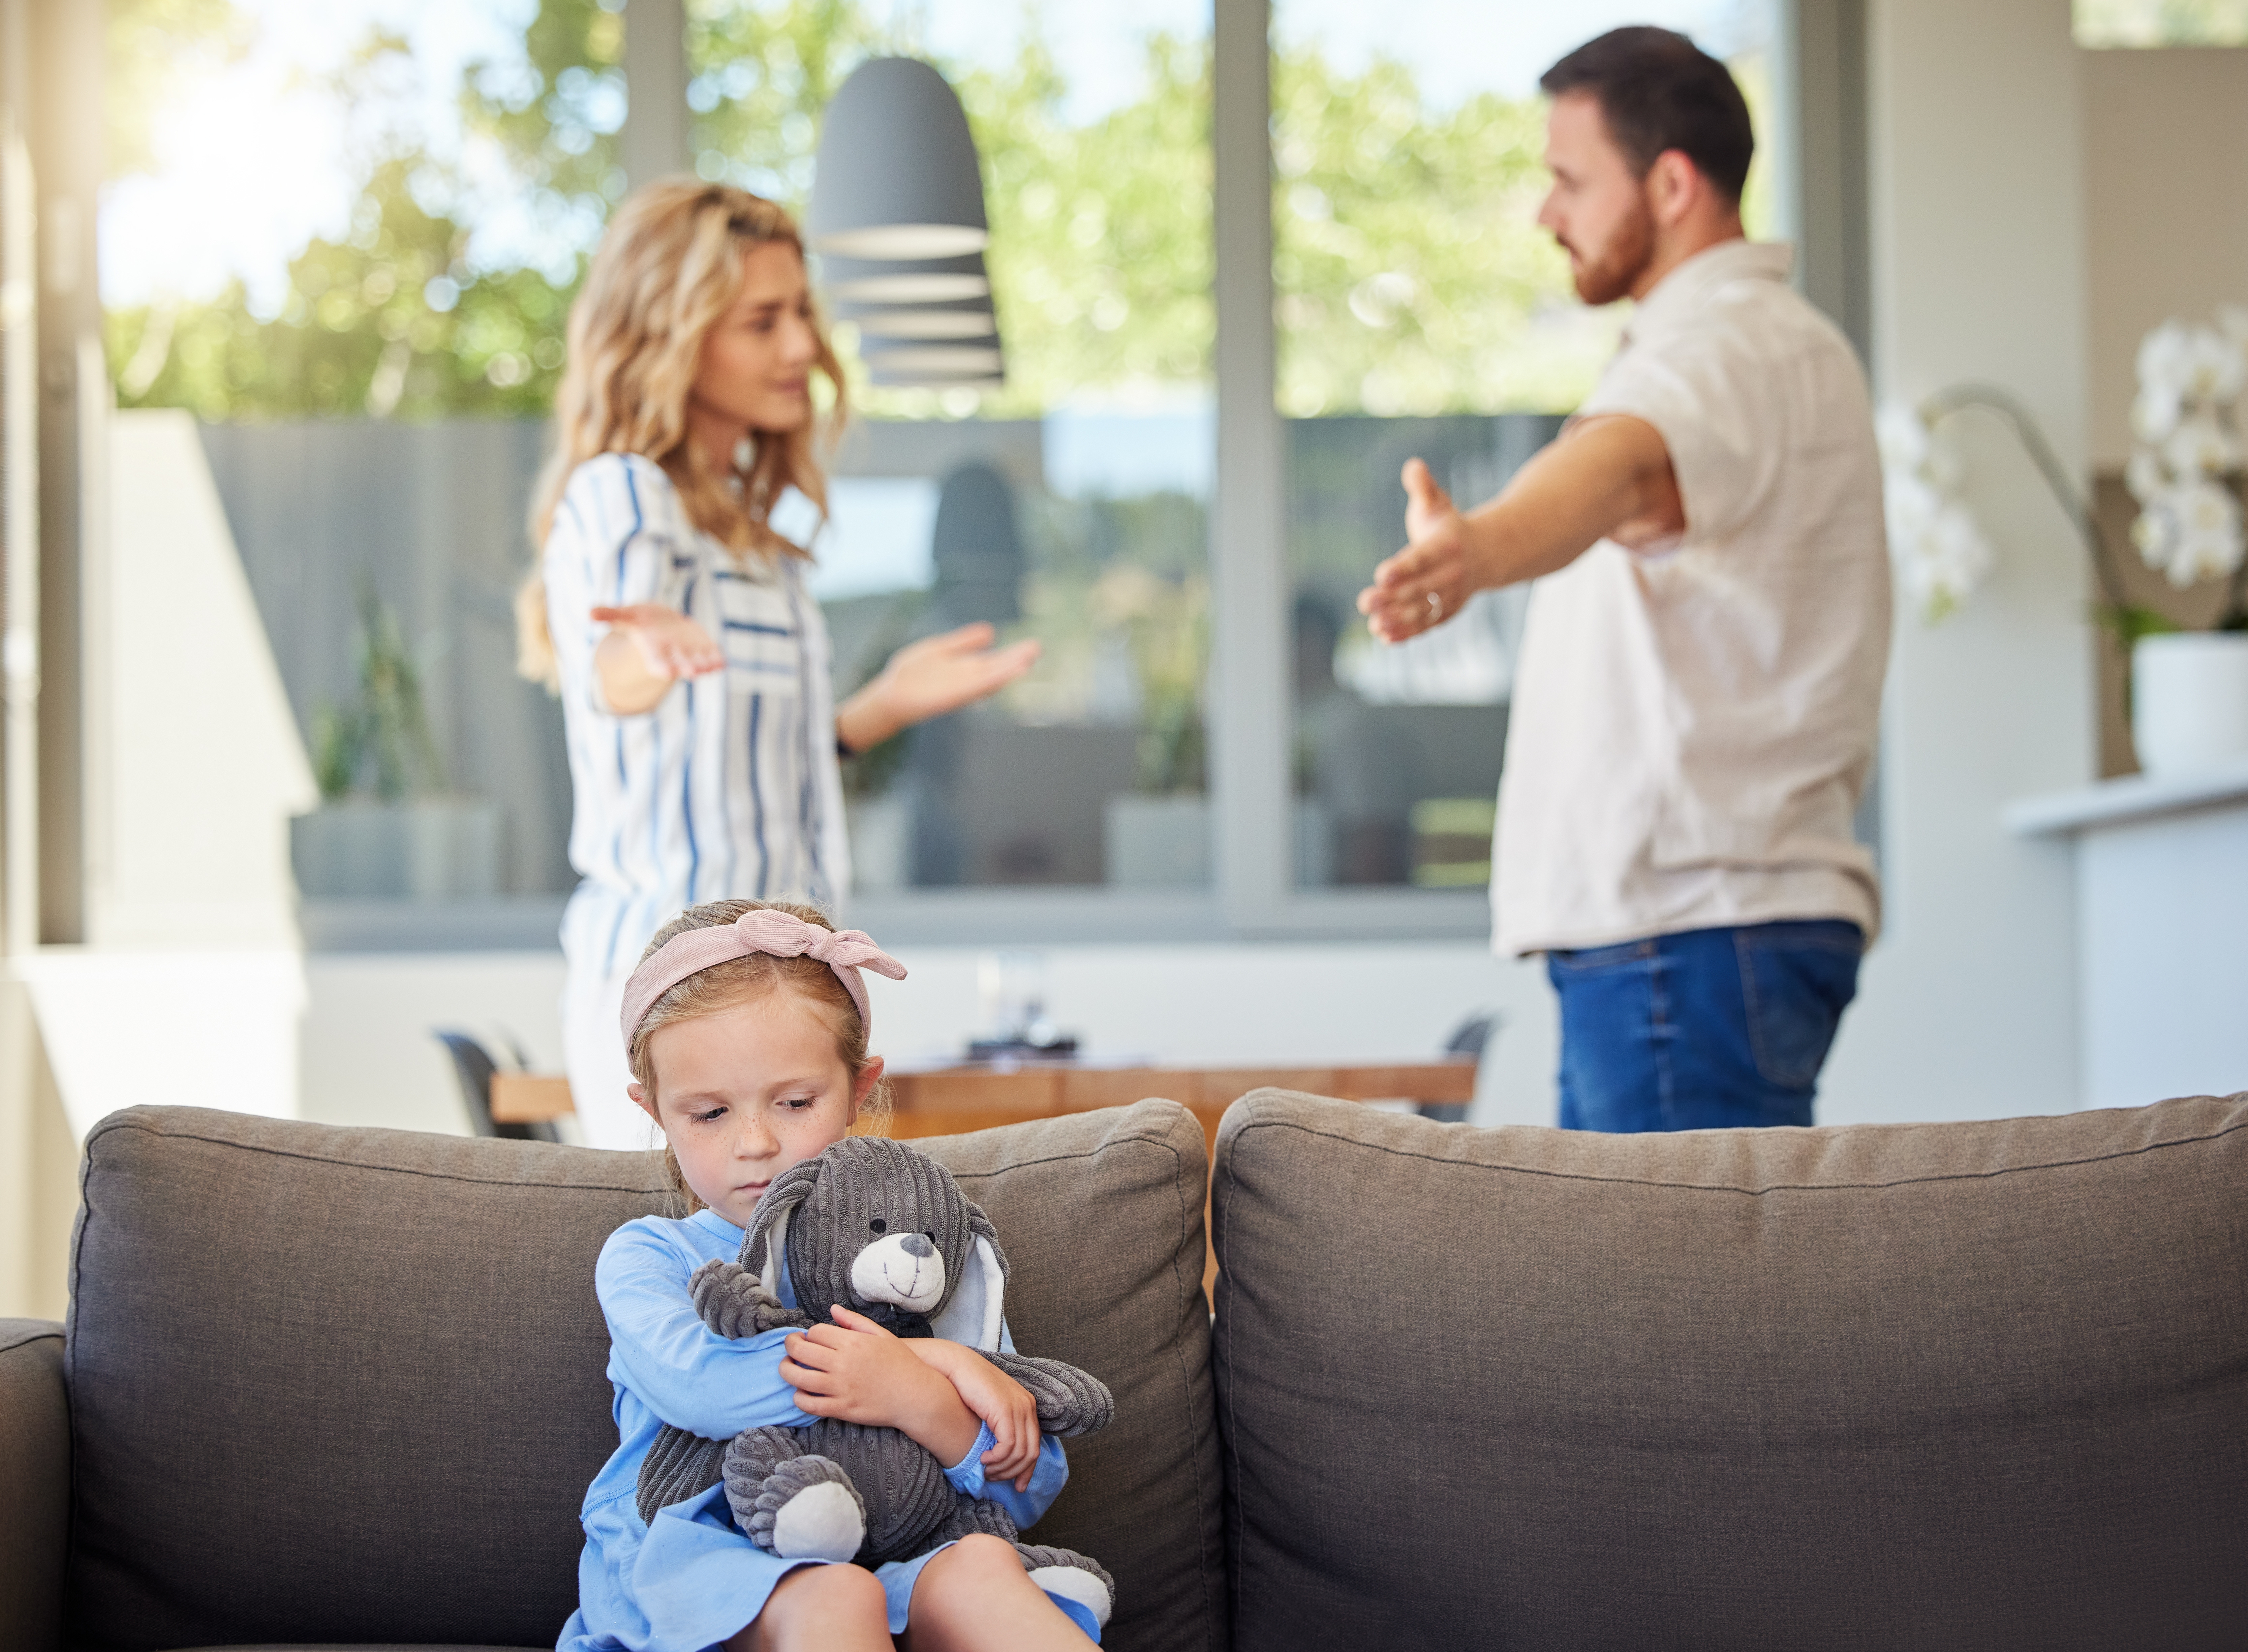 A couple arguing around their little girl | Source: Shutterstock